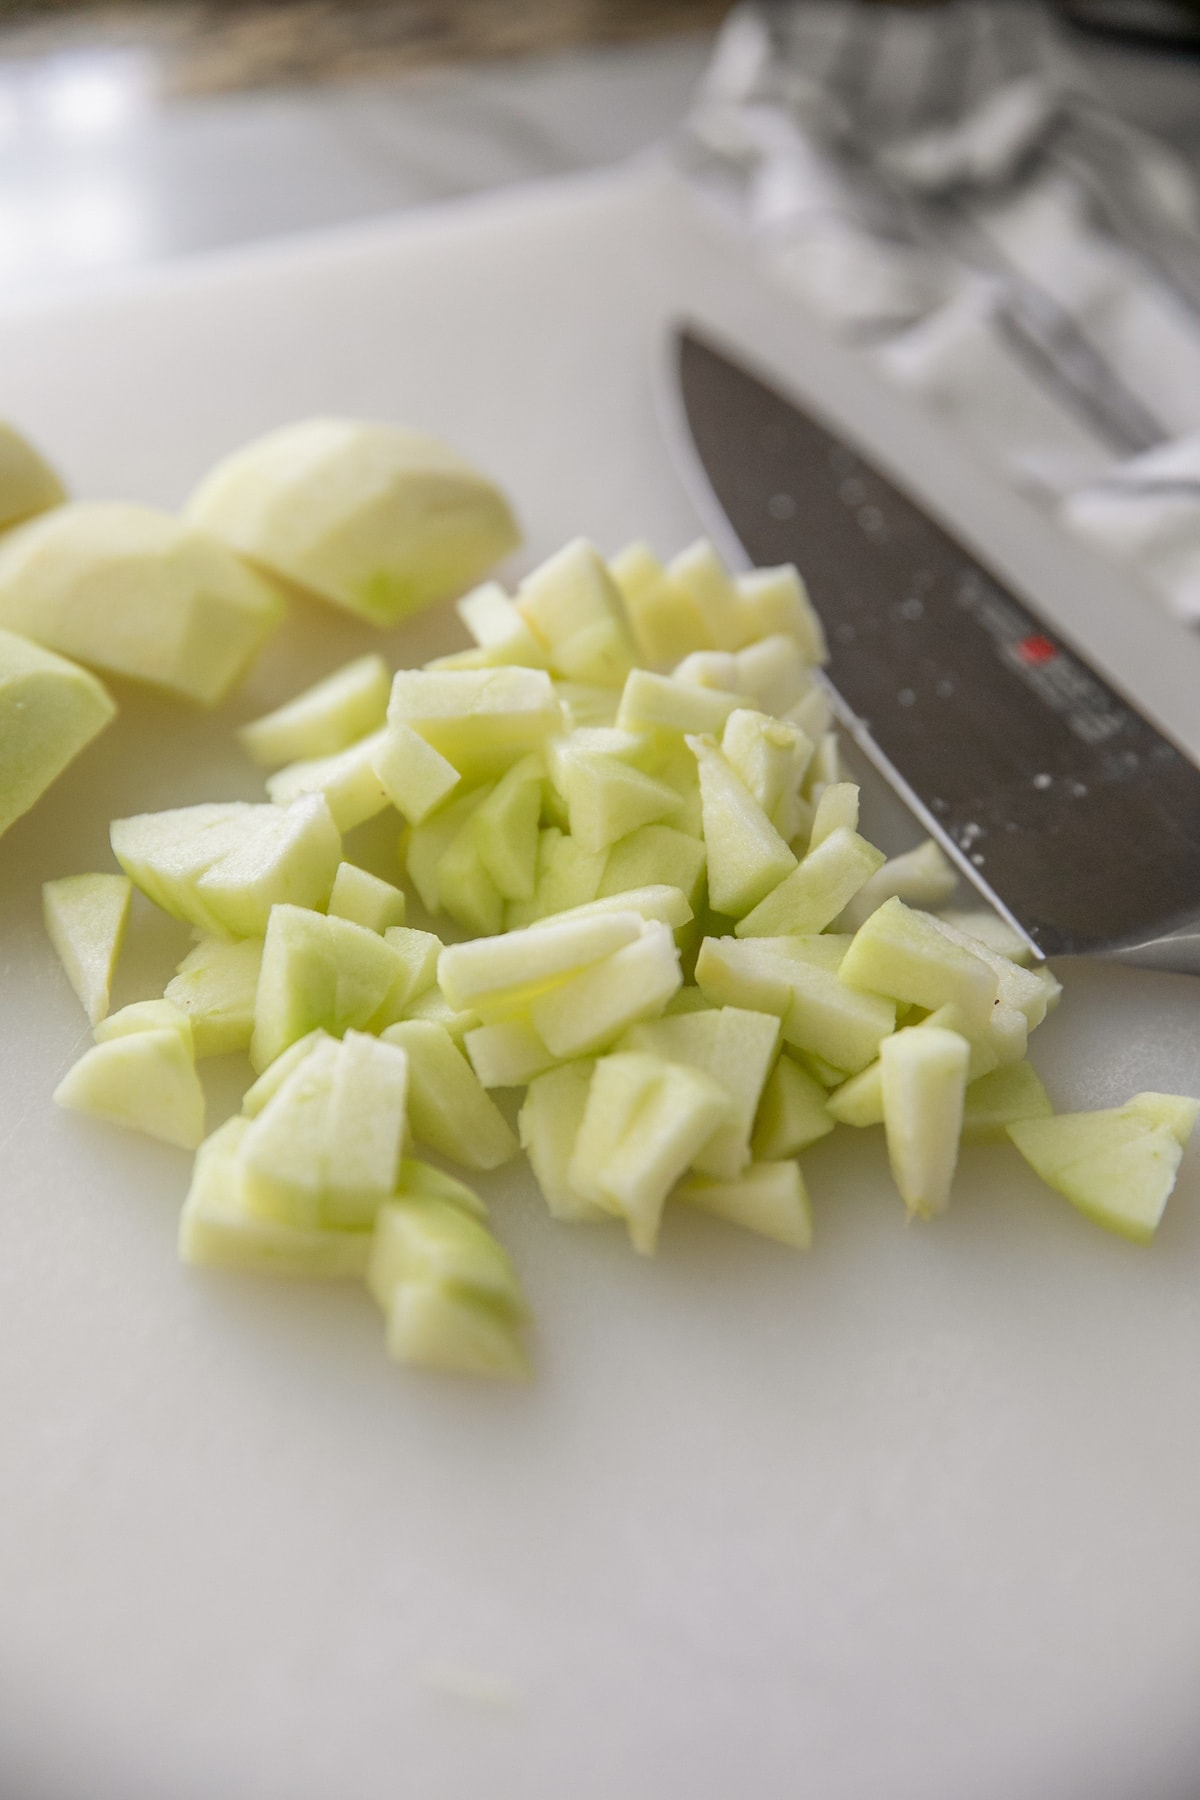 dicing apples on cutting board